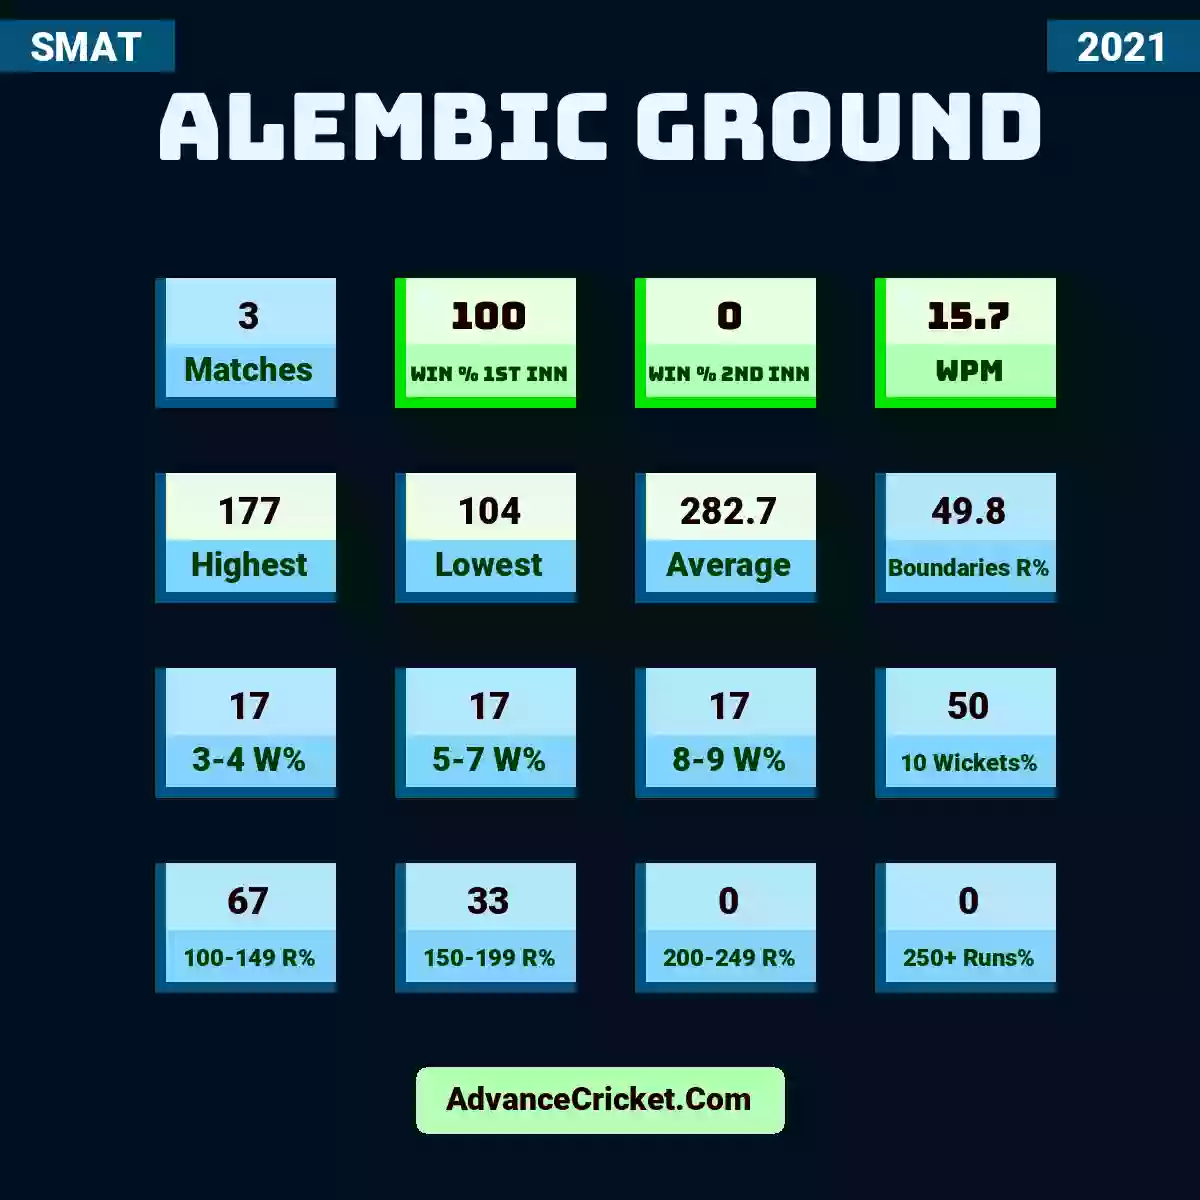 Image showing Alembic Ground with Matches: 3, Win % 1st Inn: 100, Win % 2nd Inn: 0, WPM: 15.7, Highest: 177, Lowest: 104, Average: 282.7, Boundaries R%: 49.8, 3-4 W%: 17, 5-7 W%: 17, 8-9 W%: 17, 10 Wickets%: 50, 100-149 R%: 67, 150-199 R%: 33, 200-249 R%: 0, 250+ Runs%: 0.